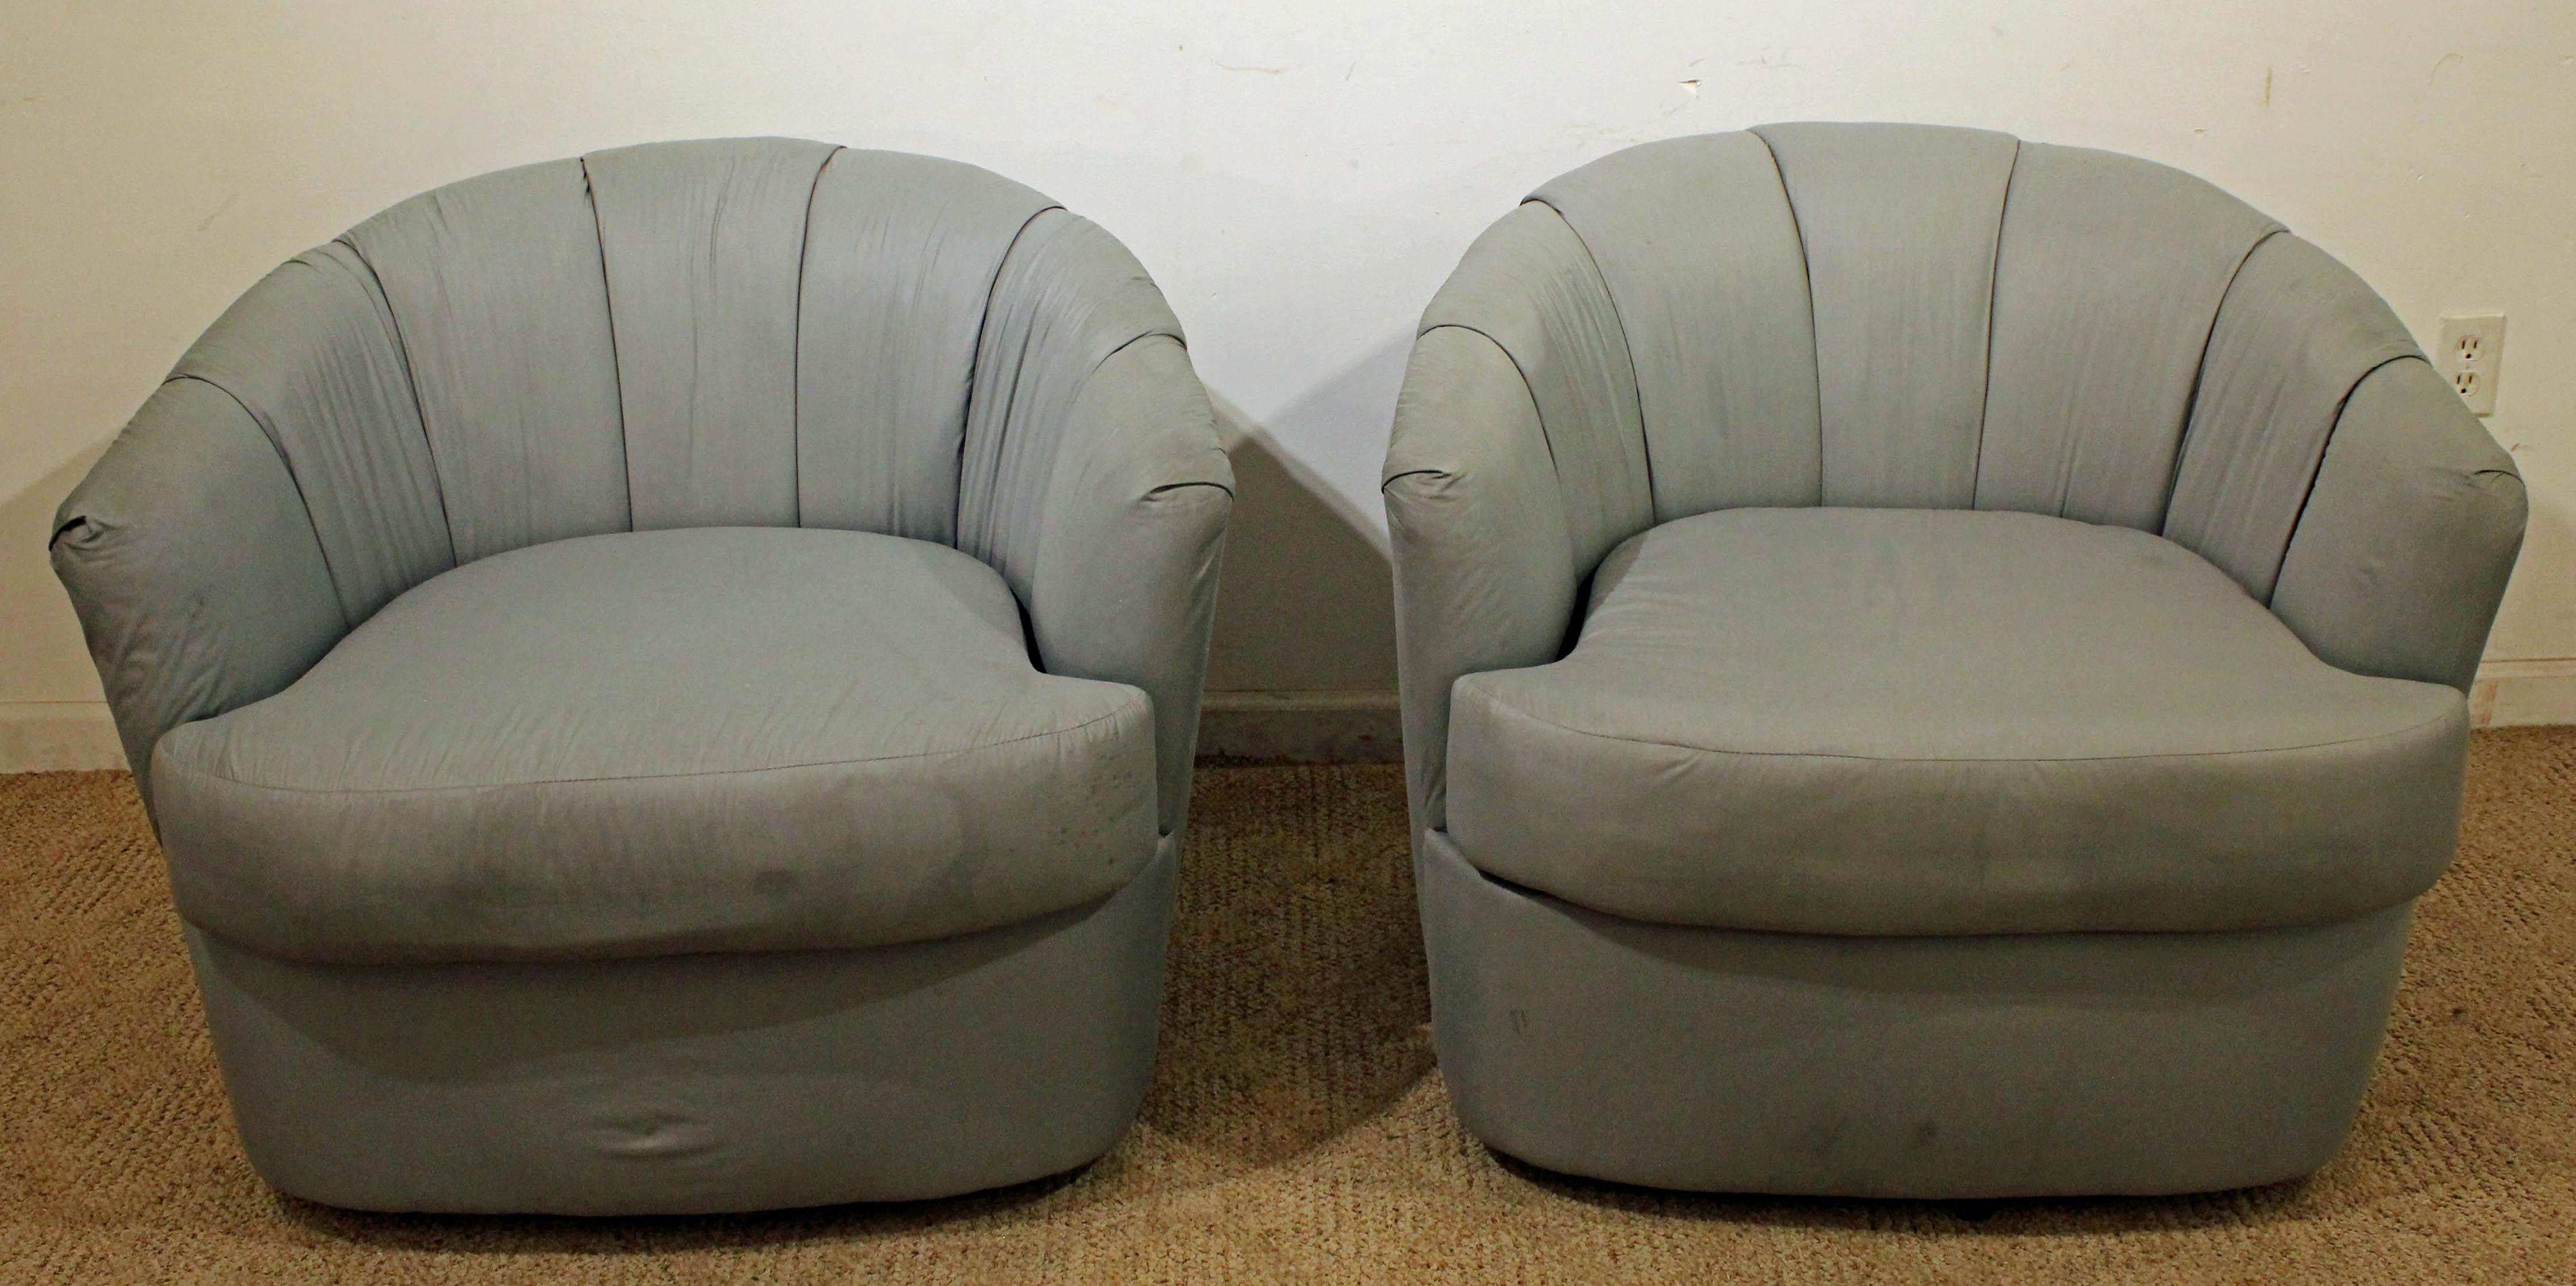 What a find. Offered is a pair of mid-century modern swivel chairs by Selig. They are in decent condition, but need to be reupholstered, showing age wear (minor tears, stains, age wear-see pics). They are signed by Selig.

Dimensions:
31